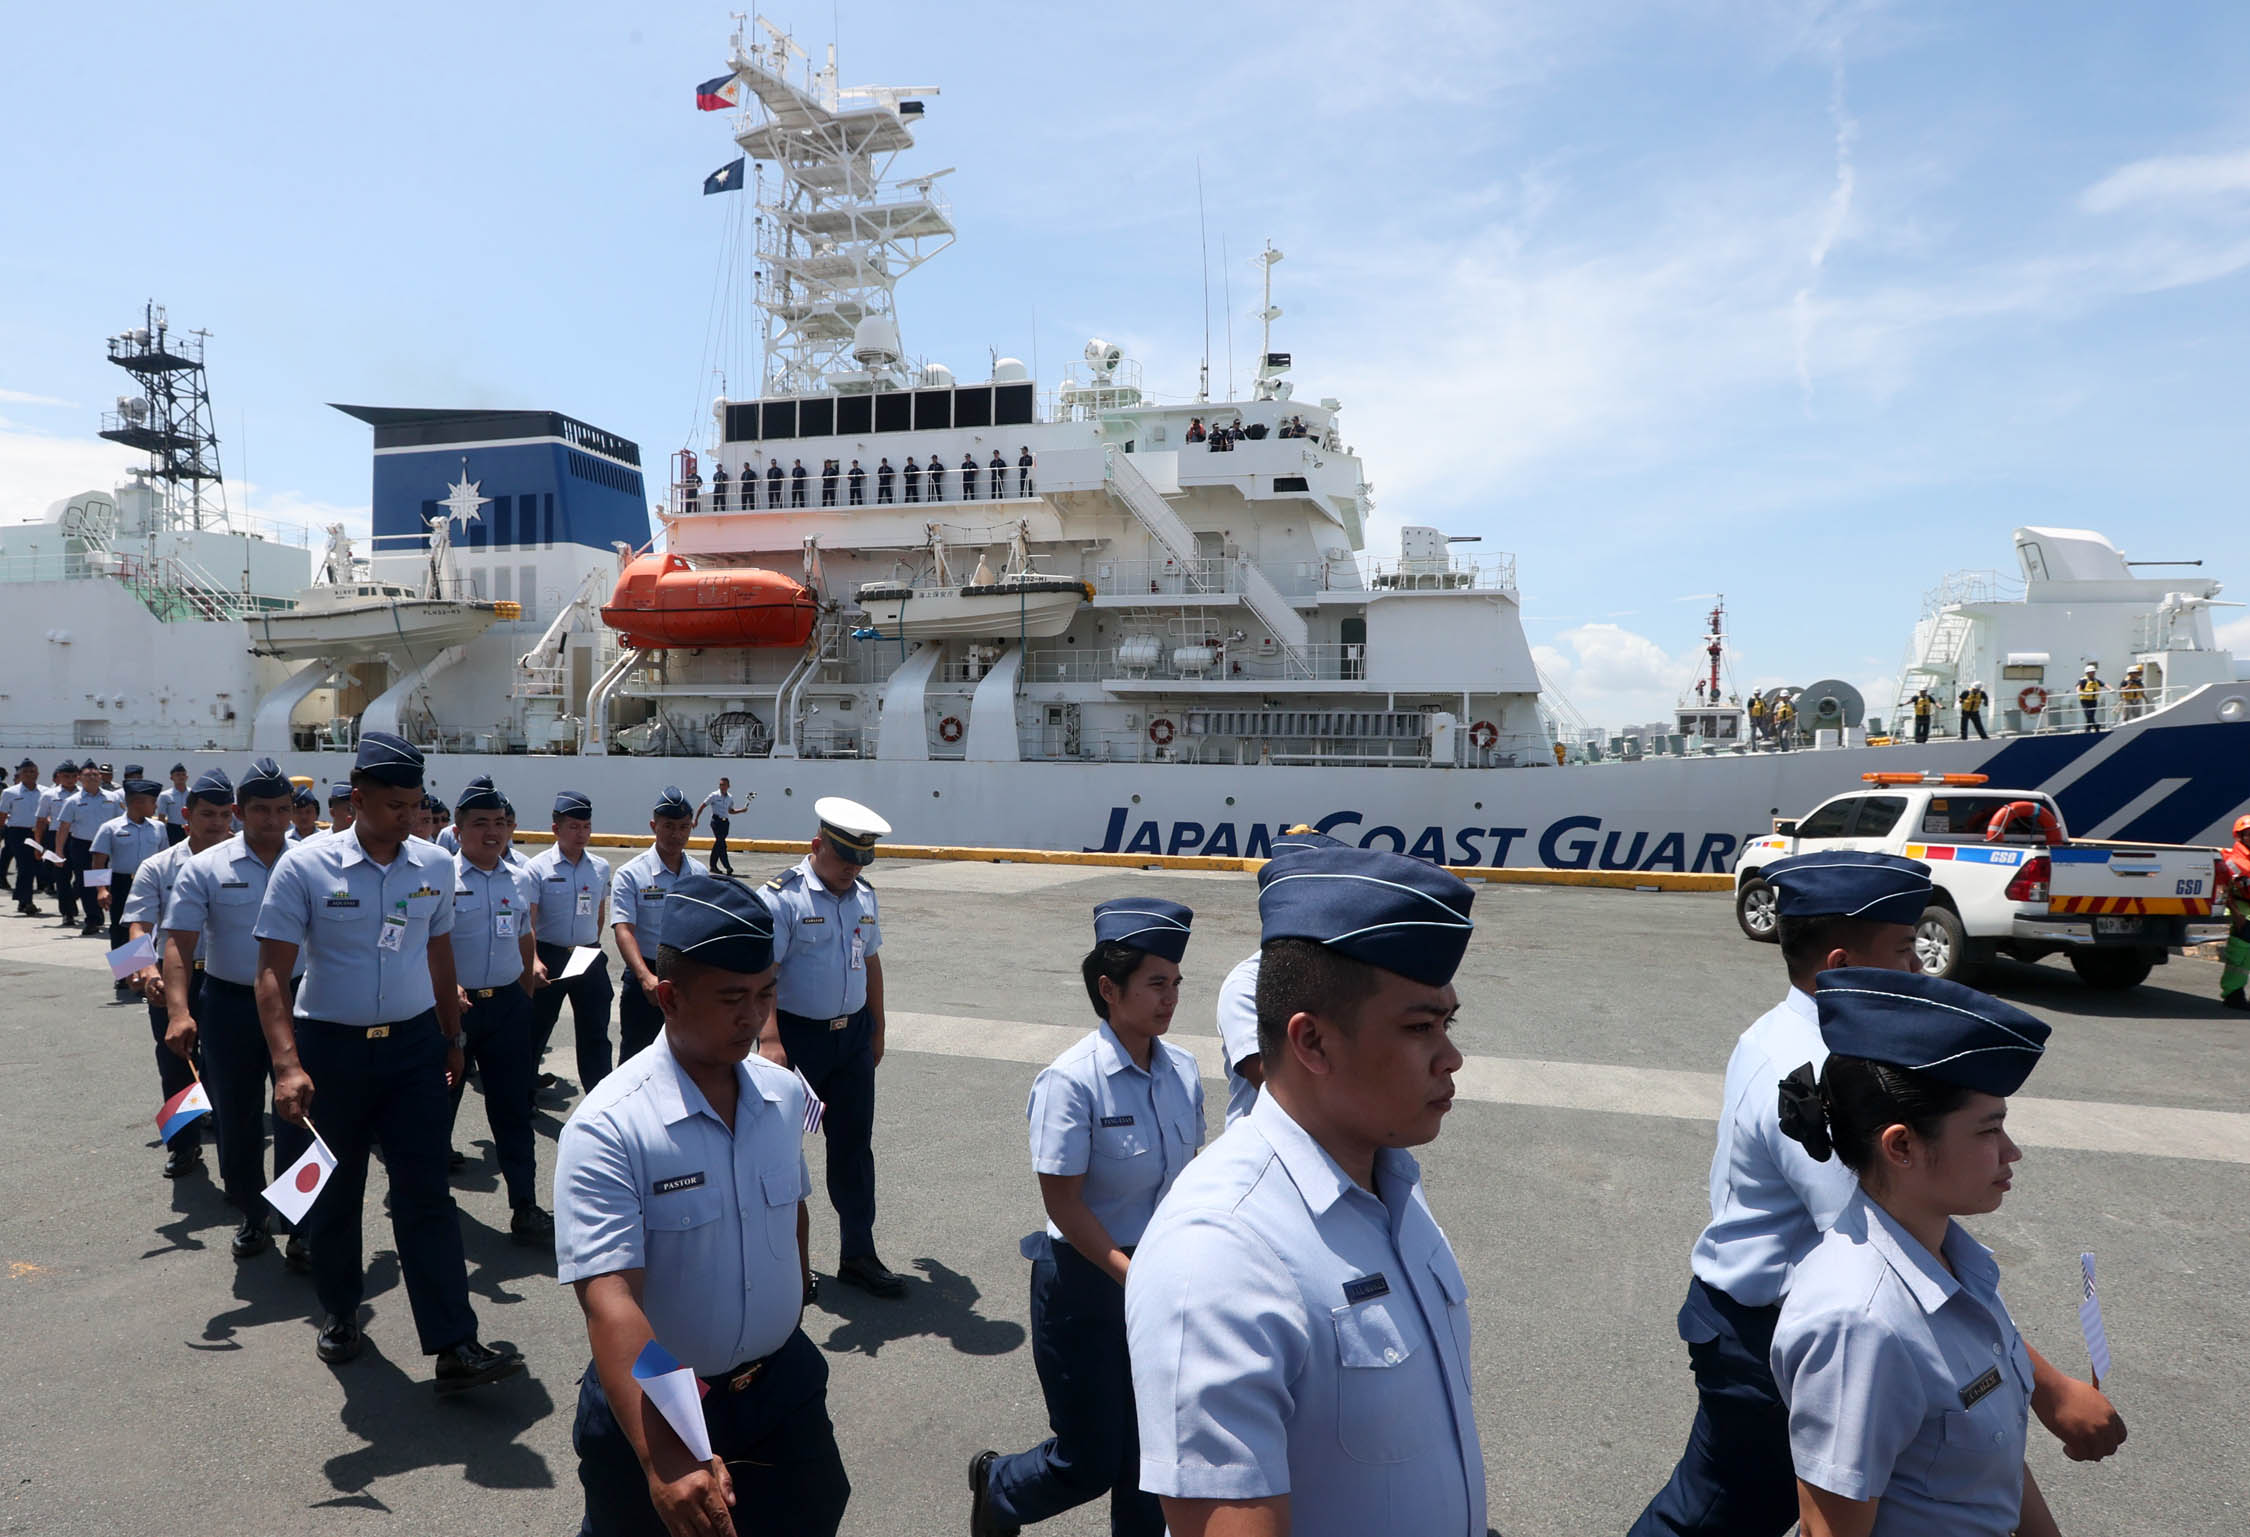 A pretend-international terrorist group carrying weapons of mass destruction (WMDs) aboard a vessel was “neutralized” by the Philippine Coast Guard (PCG) along with its counterparts from Japan and United States during the drills held on Tuesday here in the West Philippine Sea.